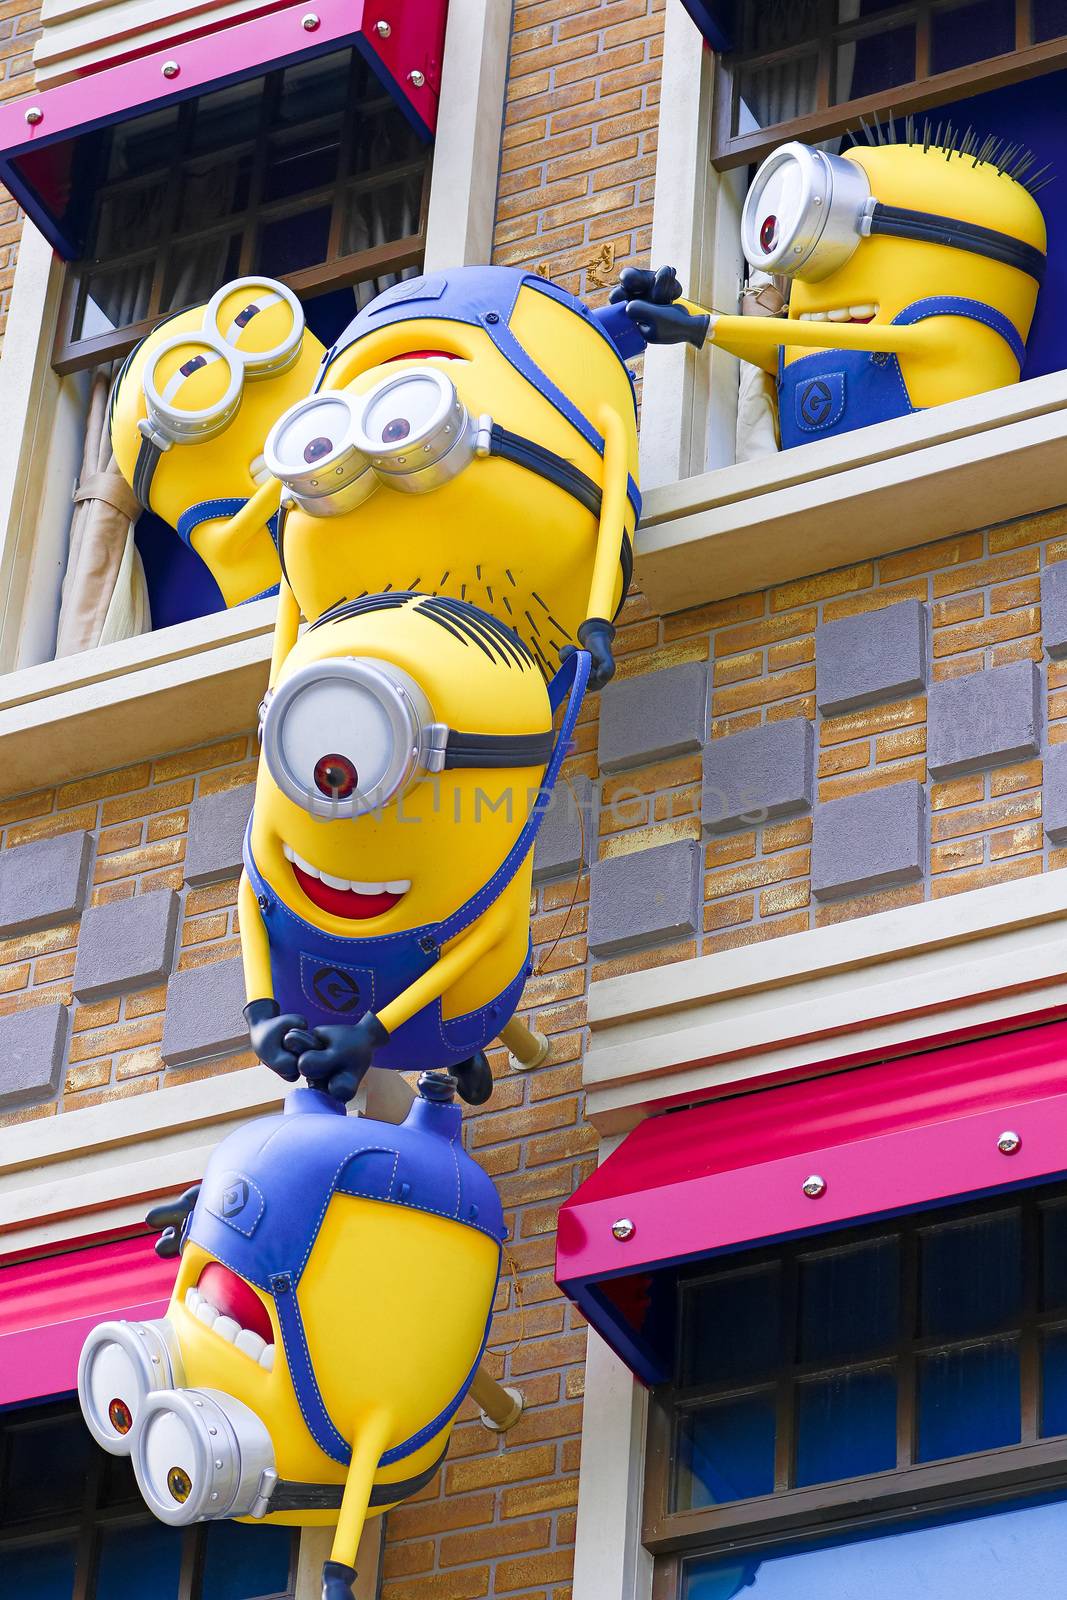 SAKA, JAPAN - June 24, 2017 : Statue of "HAPPY MINION", located in Universal Studios Japan, Osaka, Japan. Minions are famous character from Despicable Me animation. by USA-TARO